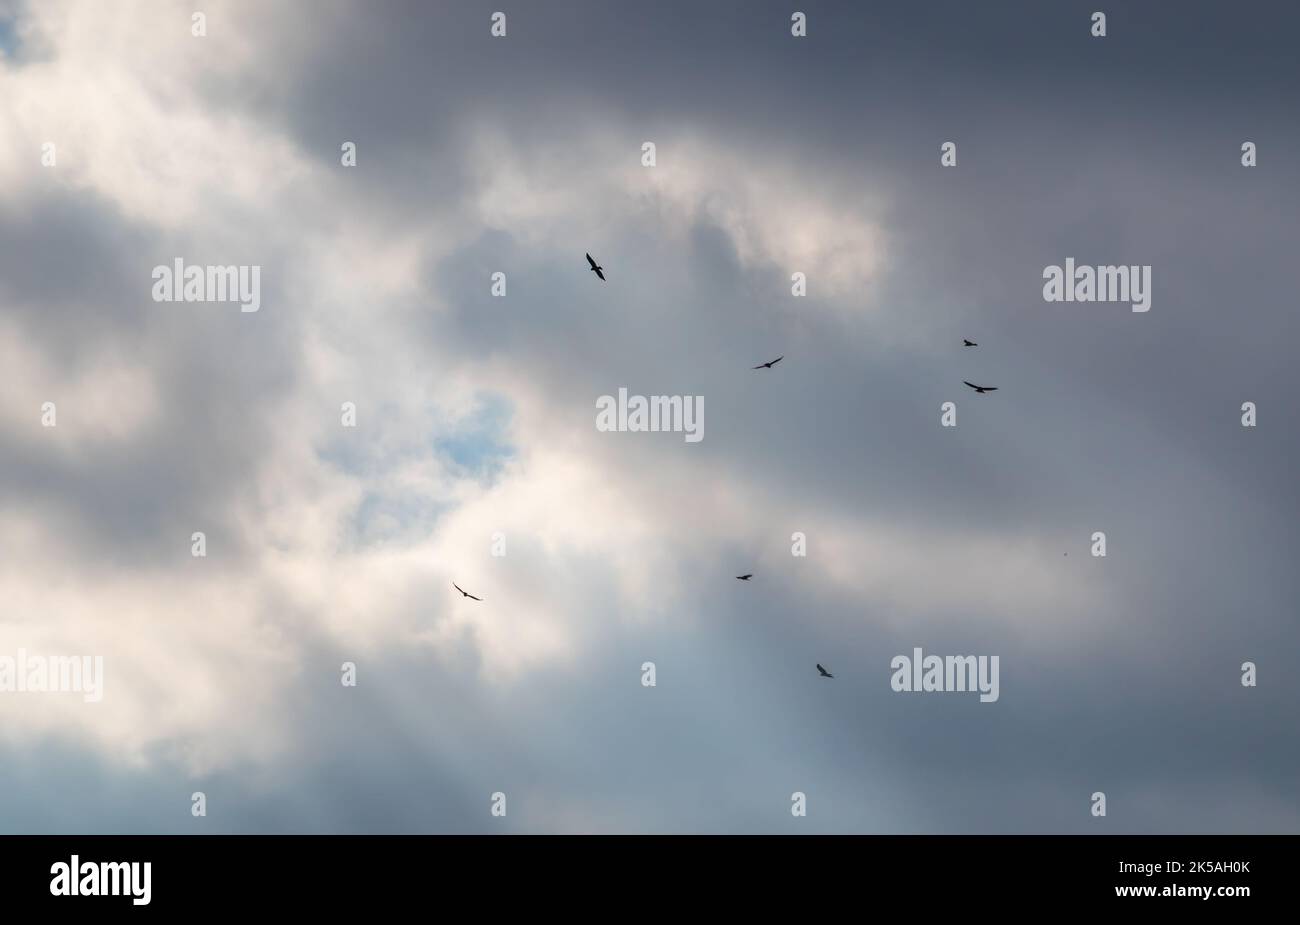 a cloudy sky with sunlight shining through and a flock of birds of prey flying in the sky Stock Photo